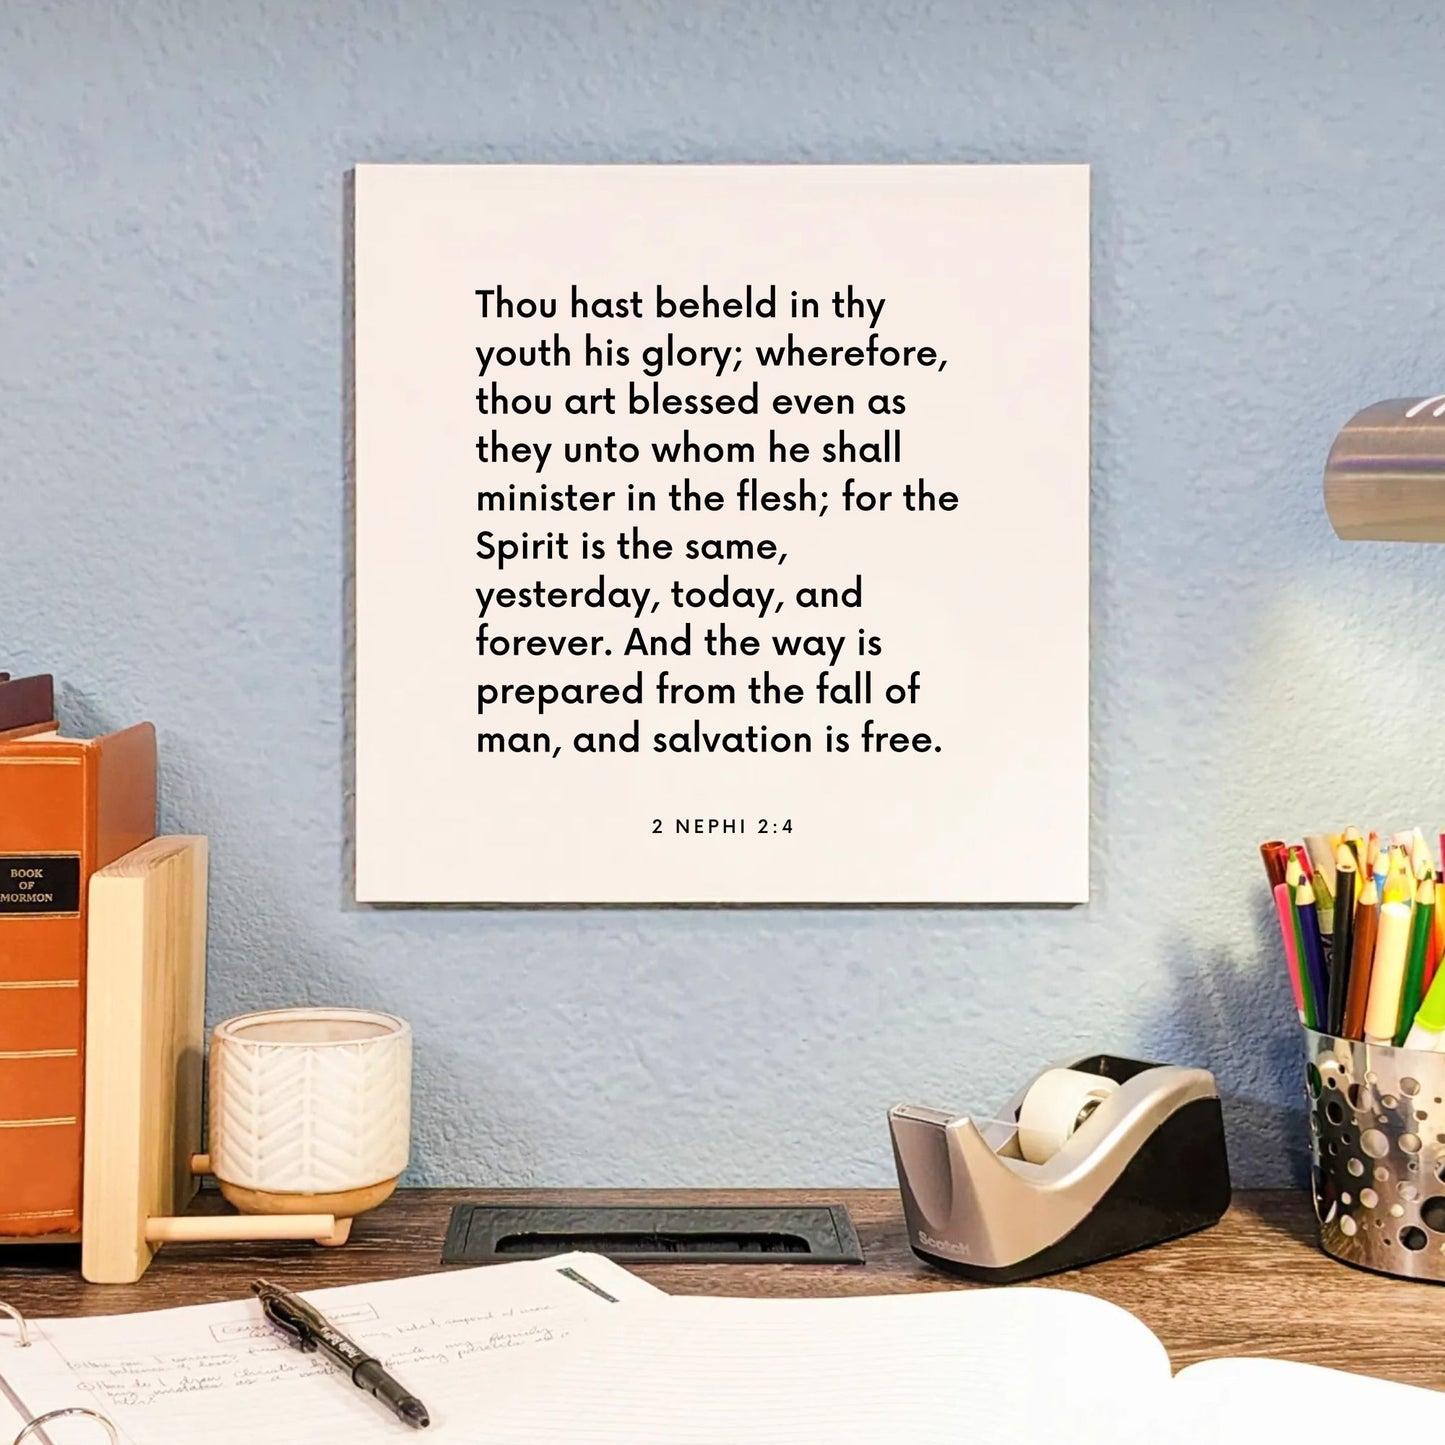 Desk mouting of the scripture tile for 2 Nephi 2:4 - "The way is prepared from the fall of man"